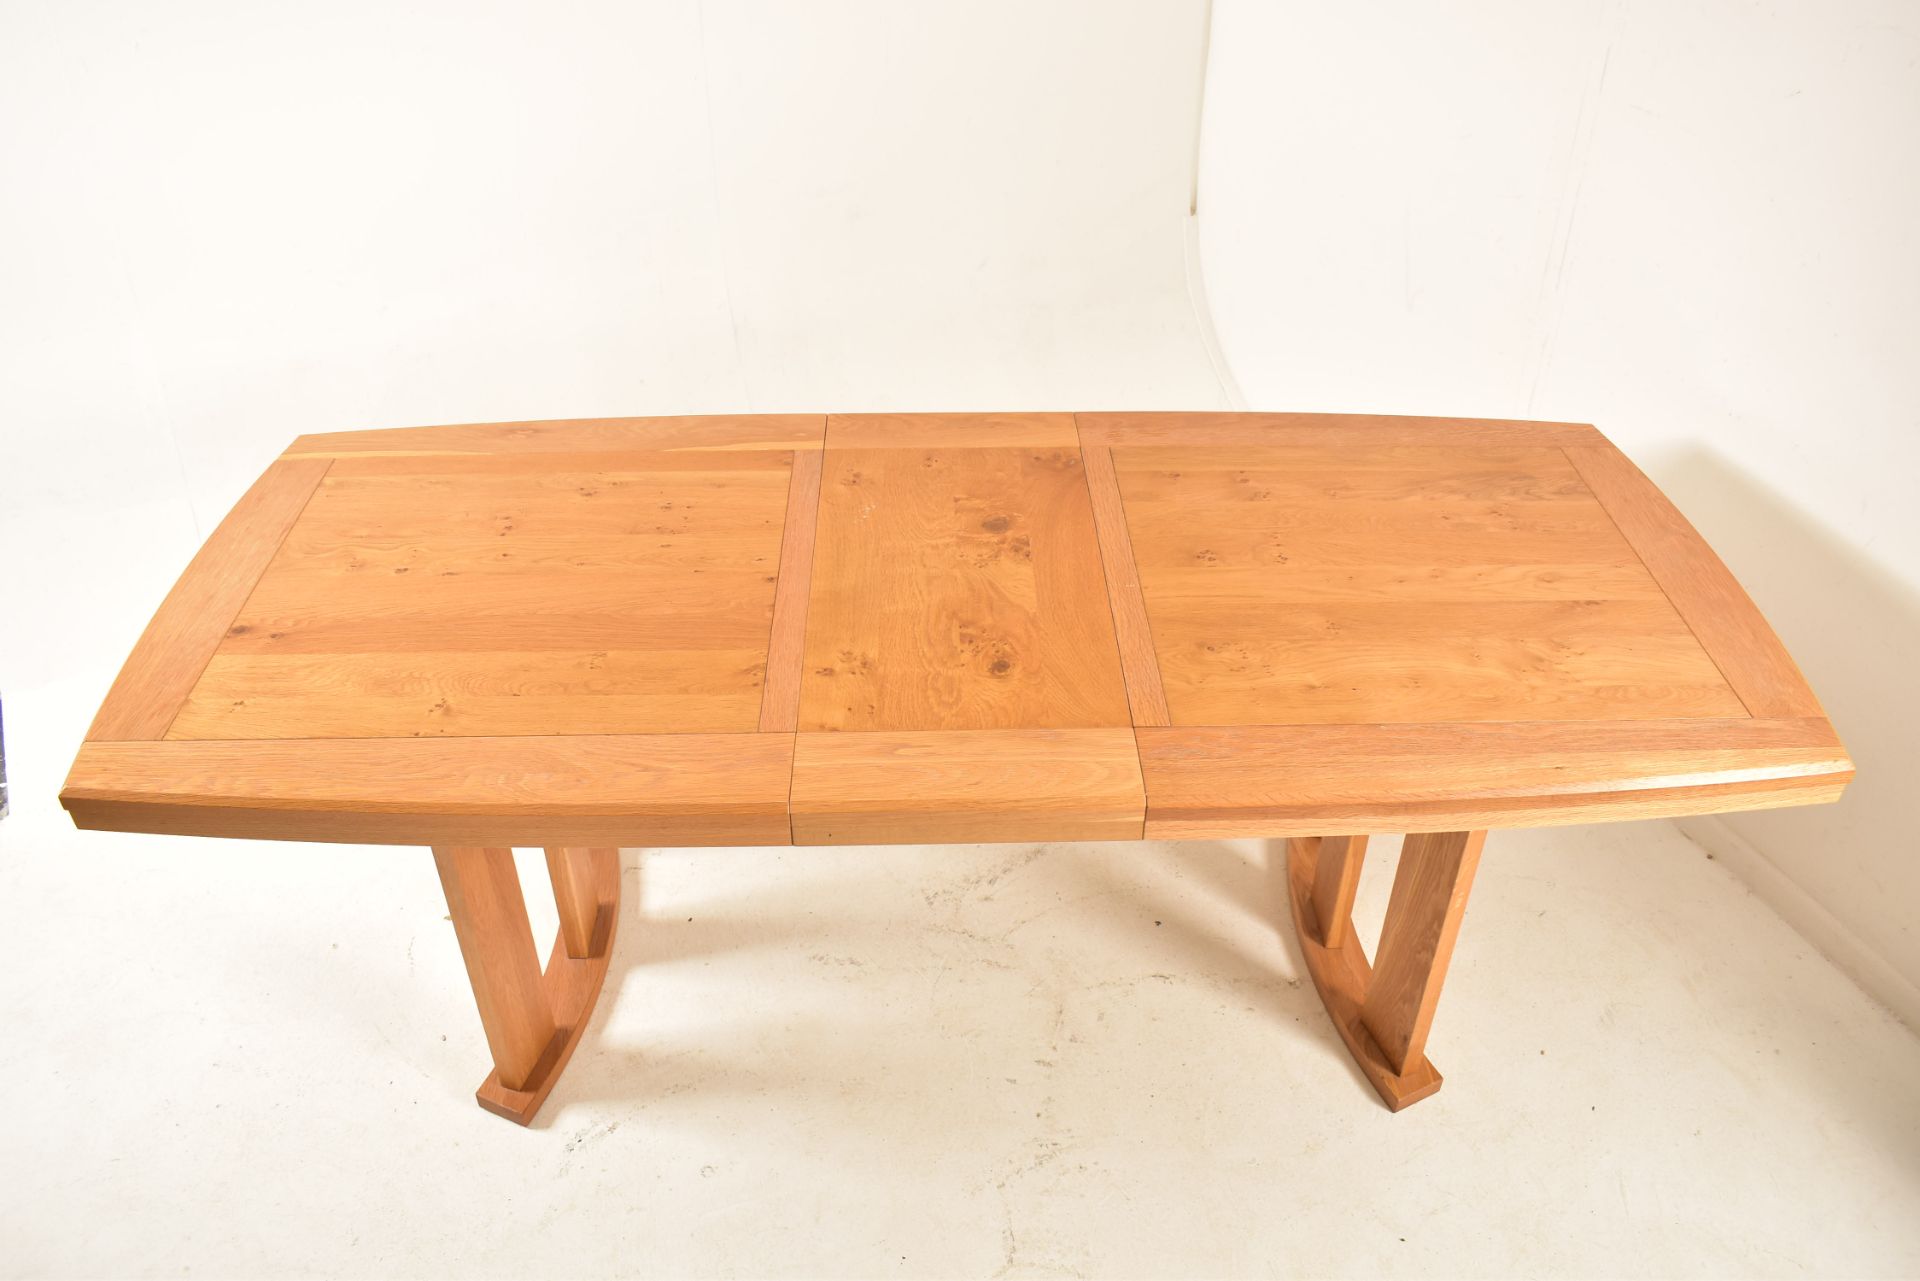 CONTEMPORARY HIGH END BRITISH DESIGN OAK DINING TABLE - Image 5 of 6